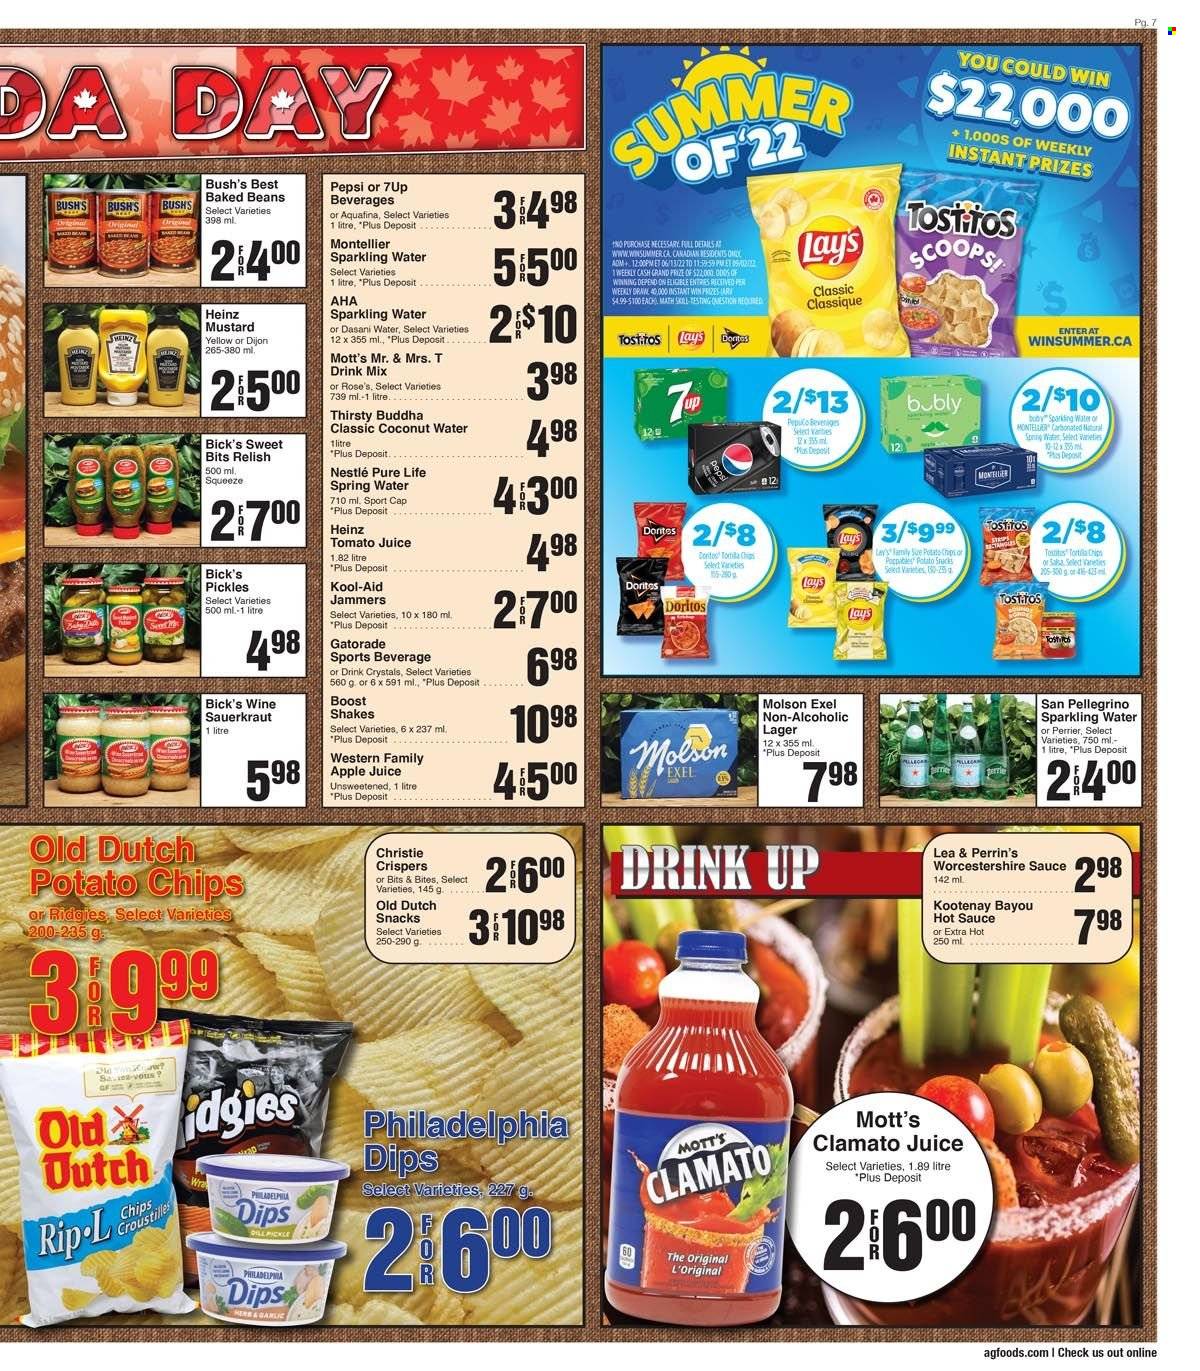 thumbnail - AG Foods Flyer - June 26, 2022 - July 02, 2022 - Sales products - beans, Mott's, shake, snack, dill pickle, Doritos, tortilla chips, potato chips, chips, Lay’s, Tostitos, sauerkraut, pickles, baked beans, dill, mustard, worcestershire sauce, hot sauce, salsa, apple juice, tomato juice, Pepsi, juice, Clamato, coconut water, 7UP, Perrier, Gatorade, Aquafina, spring water, sparkling water, San Pellegrino, Boost, rosé wine, beer, Lager, Nestlé, Heinz, Philadelphia. Page 7.